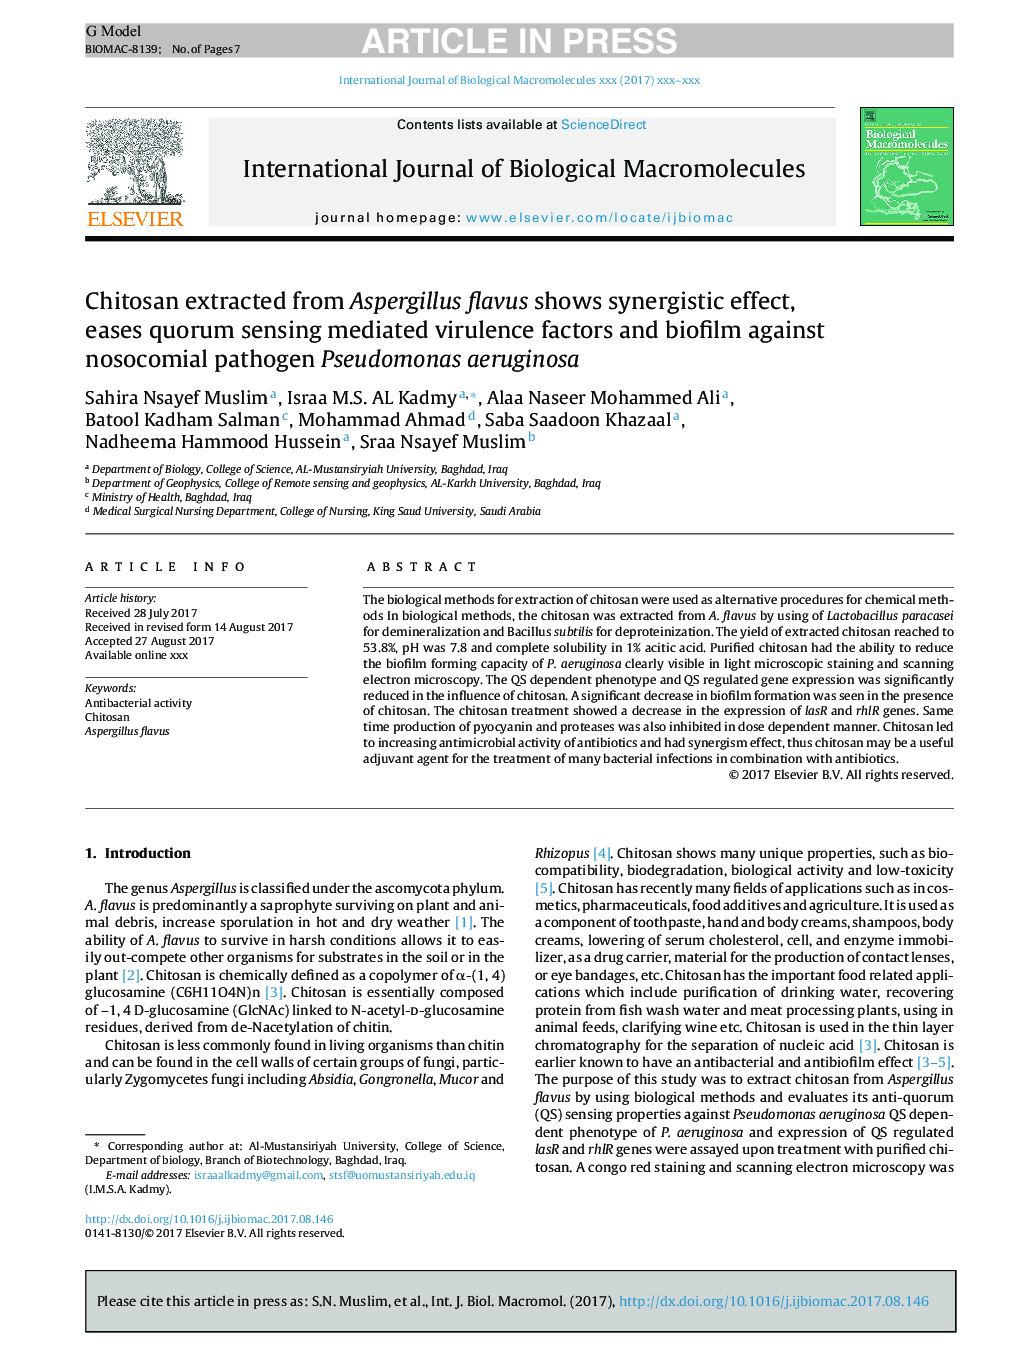 Chitosan extracted from Aspergillus flavus shows synergistic effect, eases quorum sensing mediated virulence factors and biofilm against nosocomial pathogen Pseudomonas aeruginosa